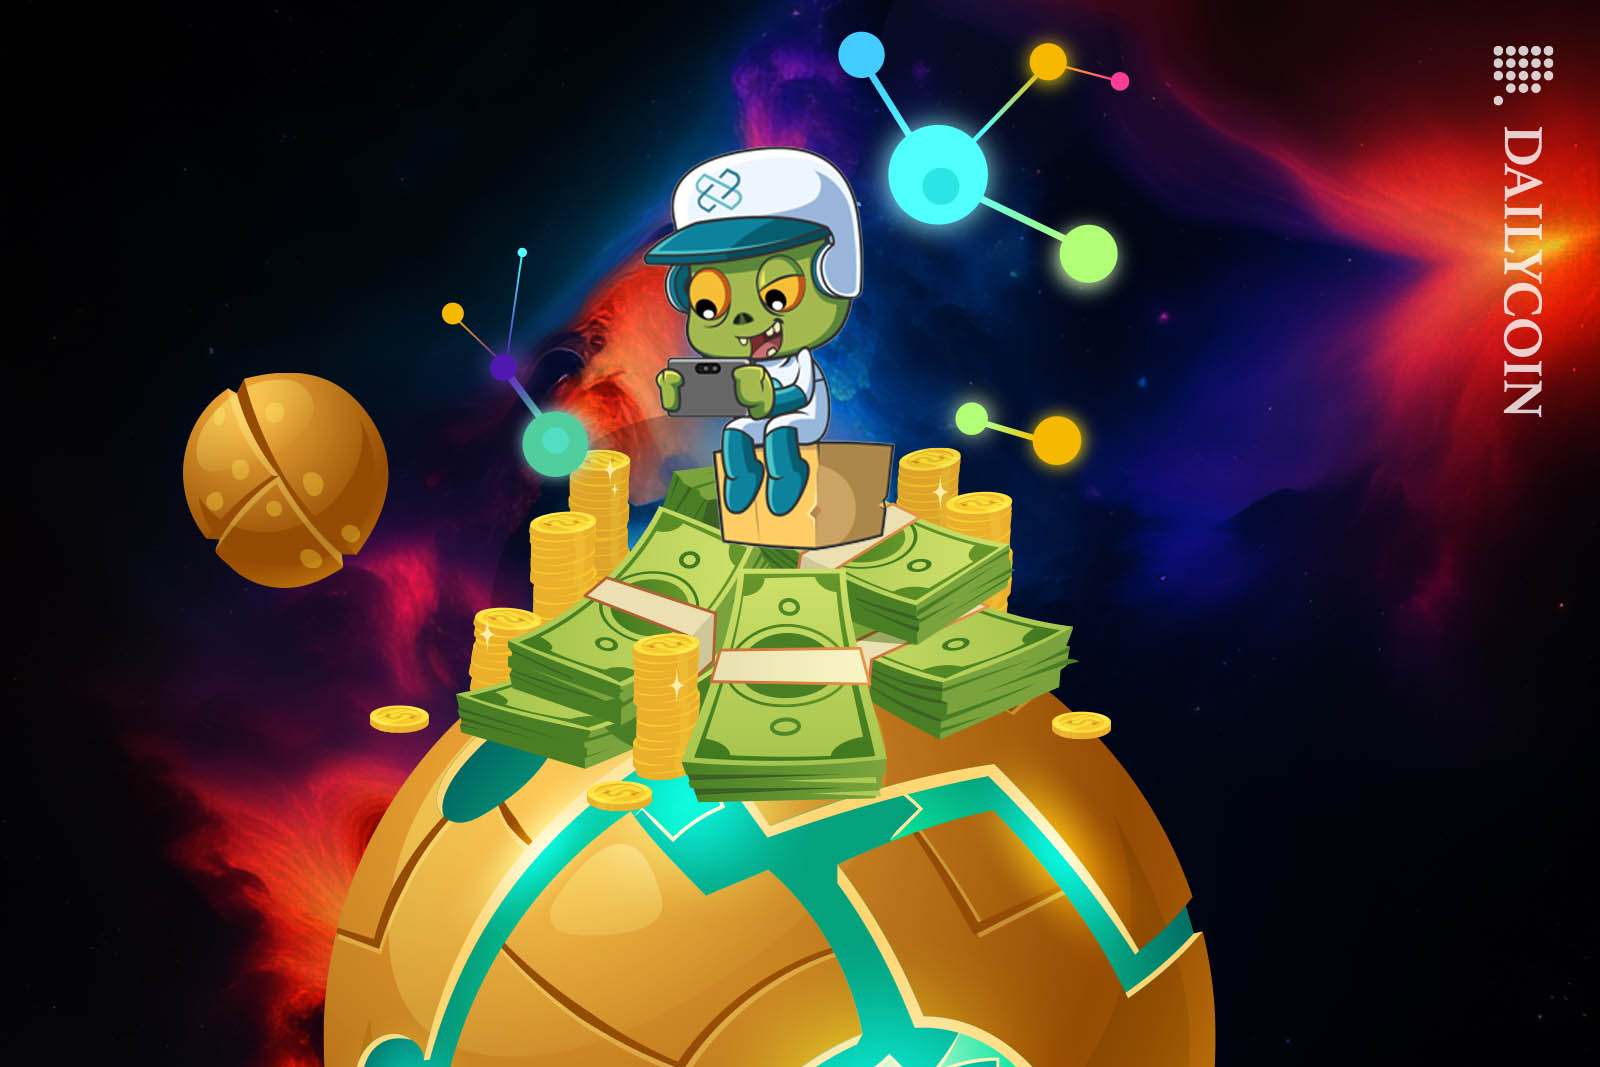 Cartoon LOOM alien character standing on a pile of cash on his alien planet.